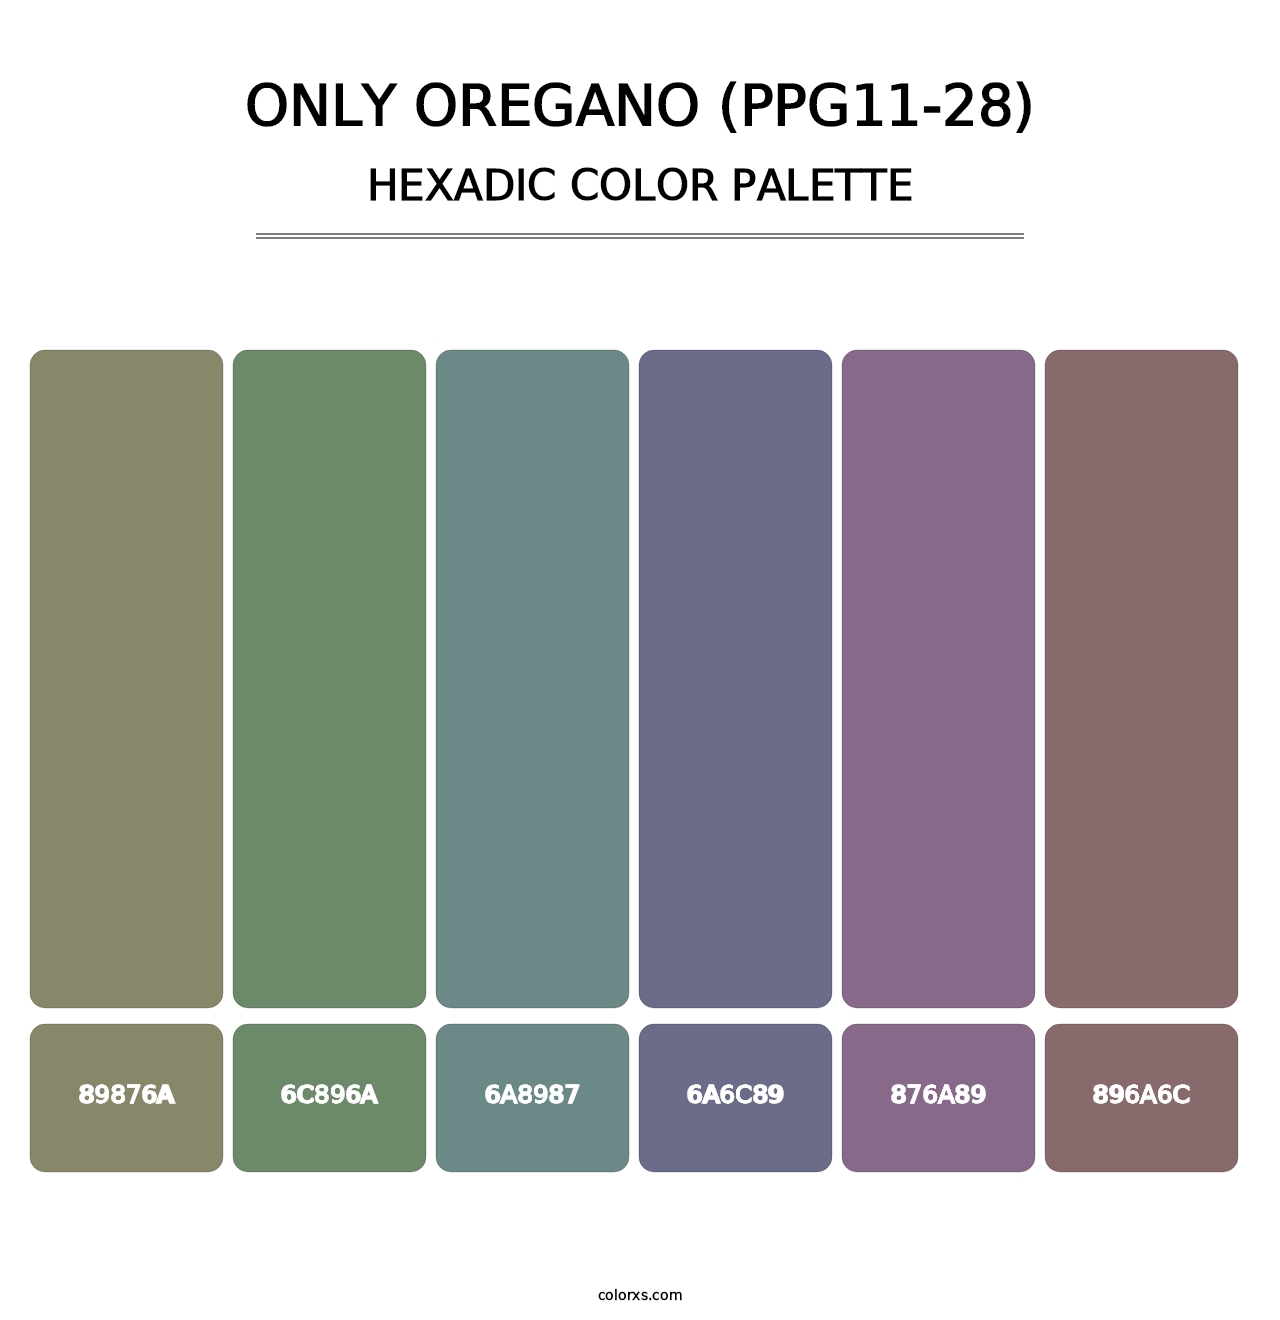 Only Oregano (PPG11-28) - Hexadic Color Palette